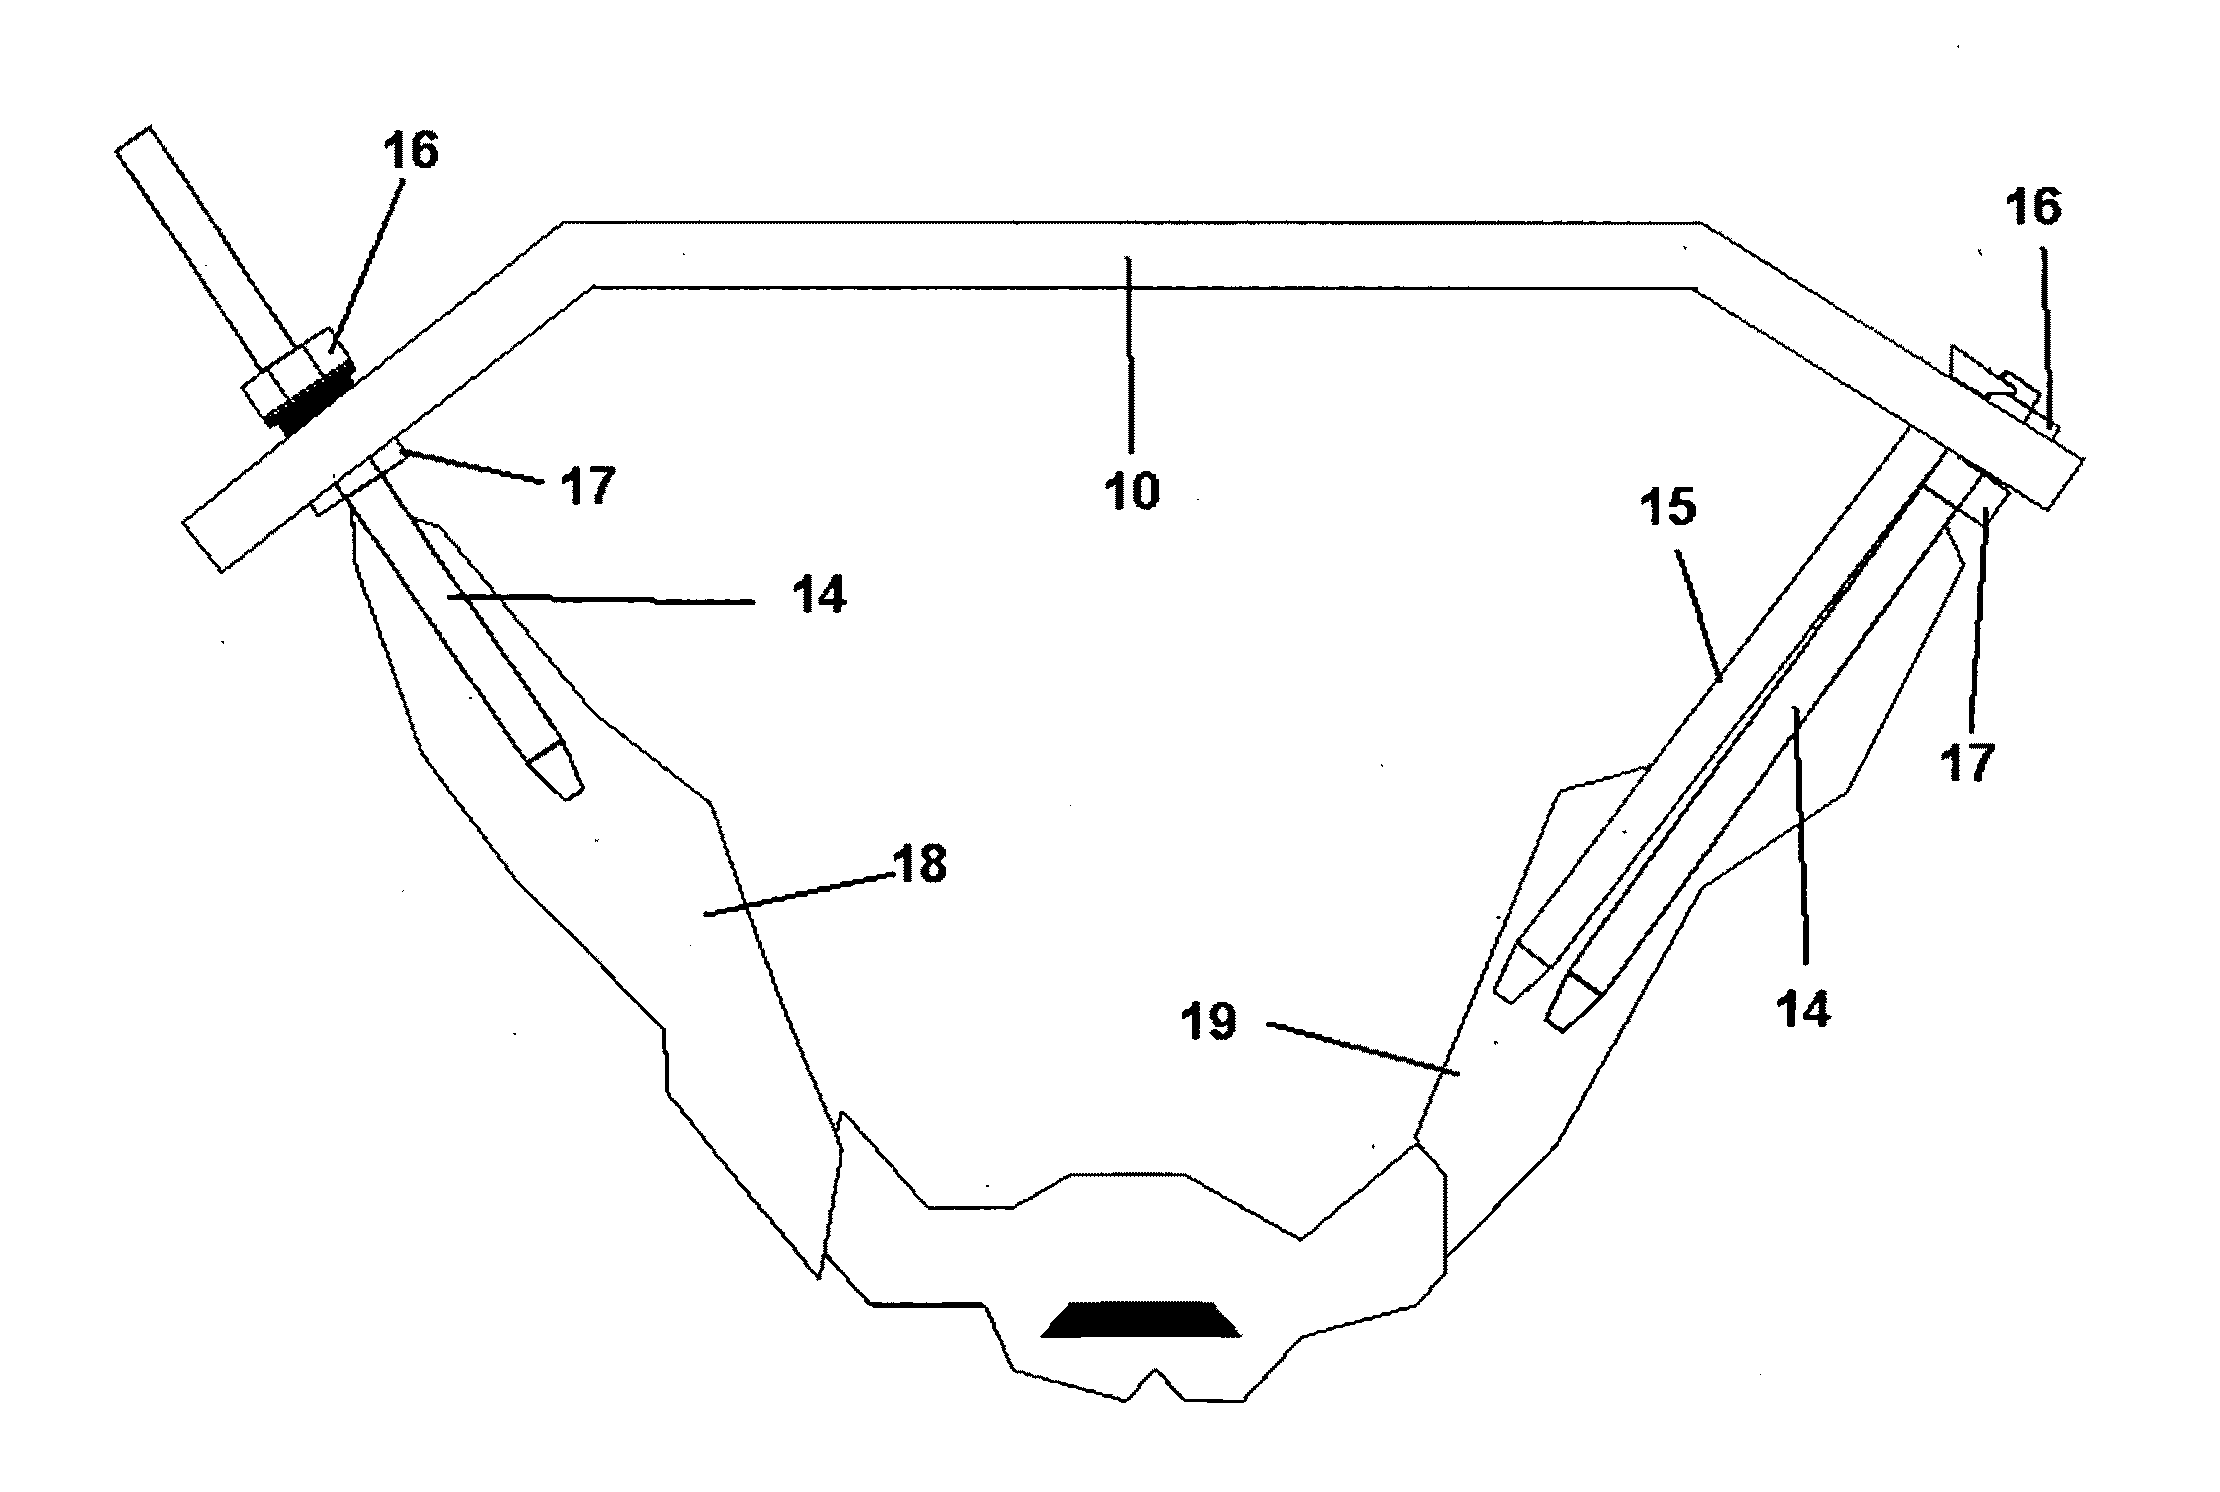 Method and apparatus for minimally invasive treatment of unstable pelvic ring injuries